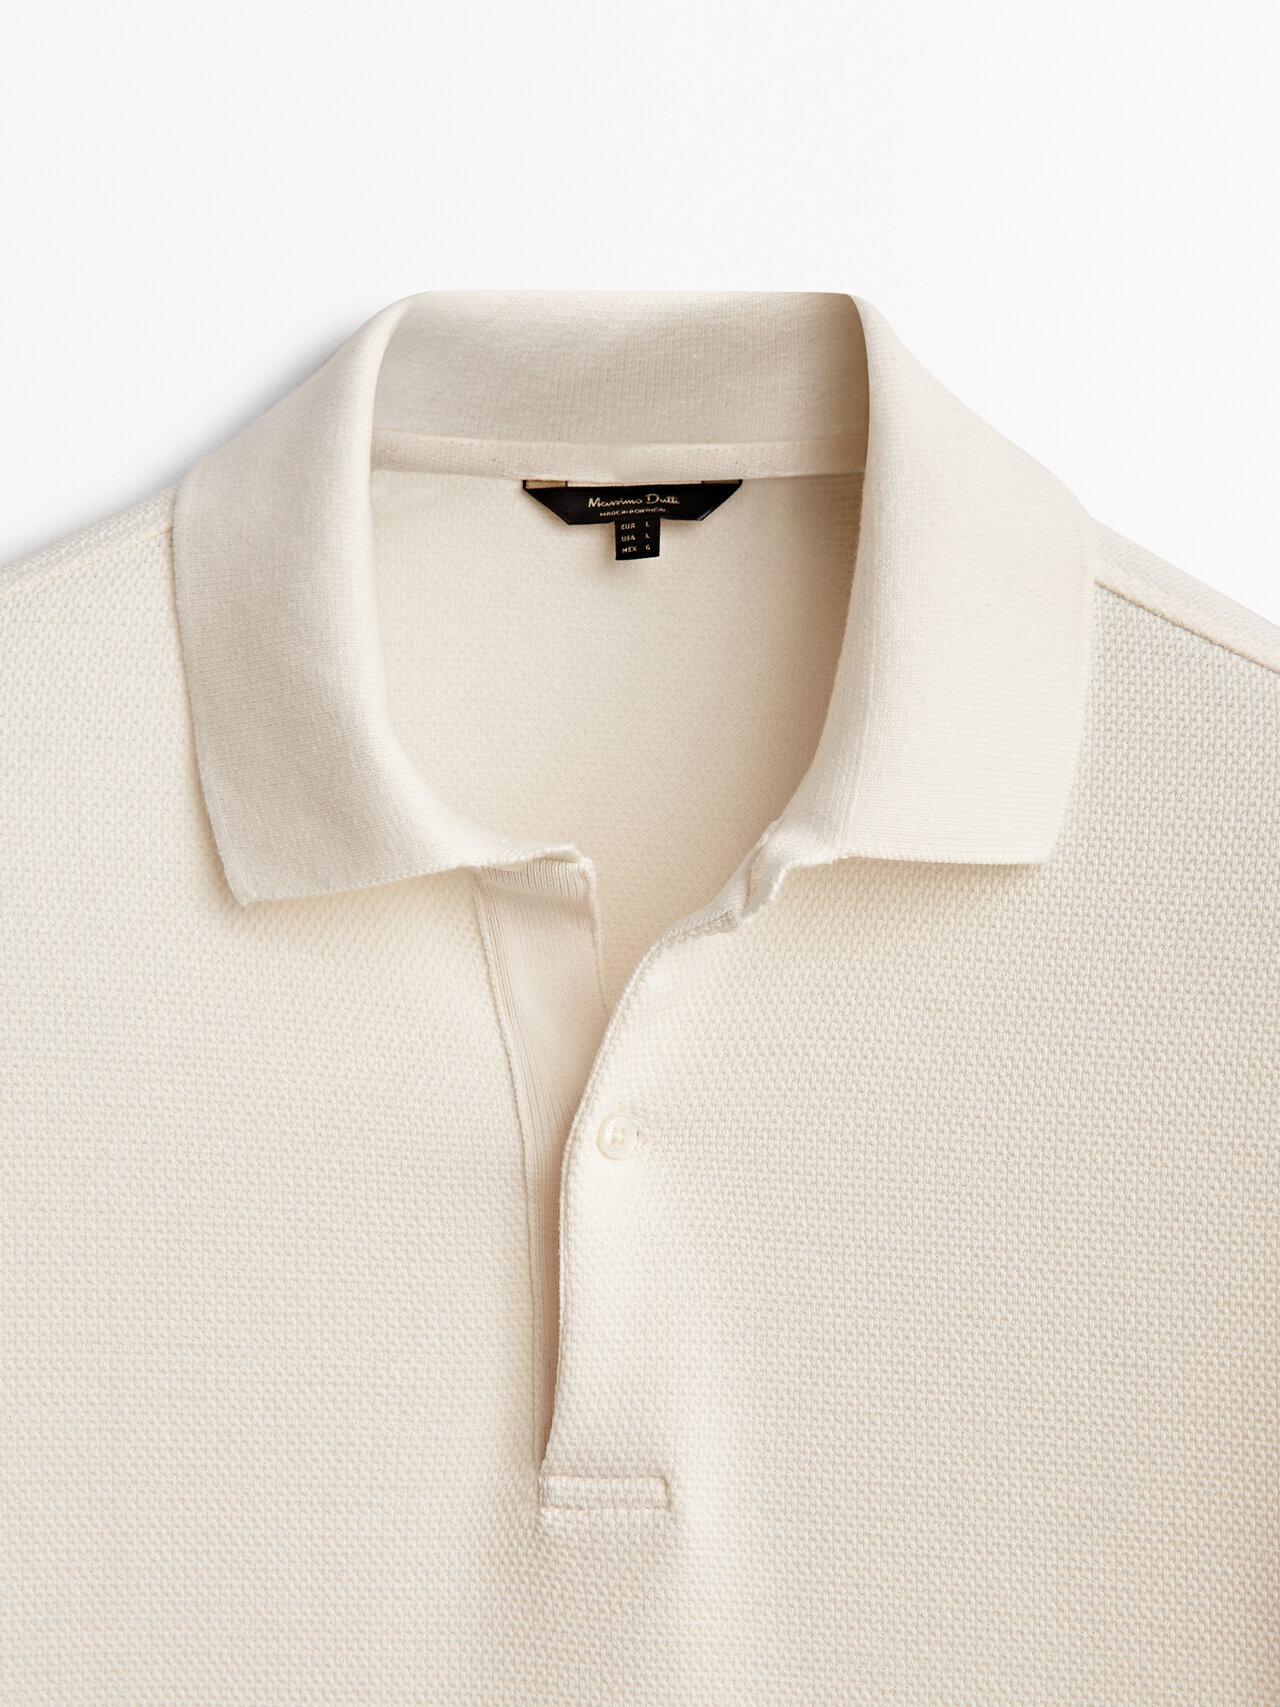 MASSIMO DUTTI Cotton Textured Polo Shirt in Natural for Men | Lyst